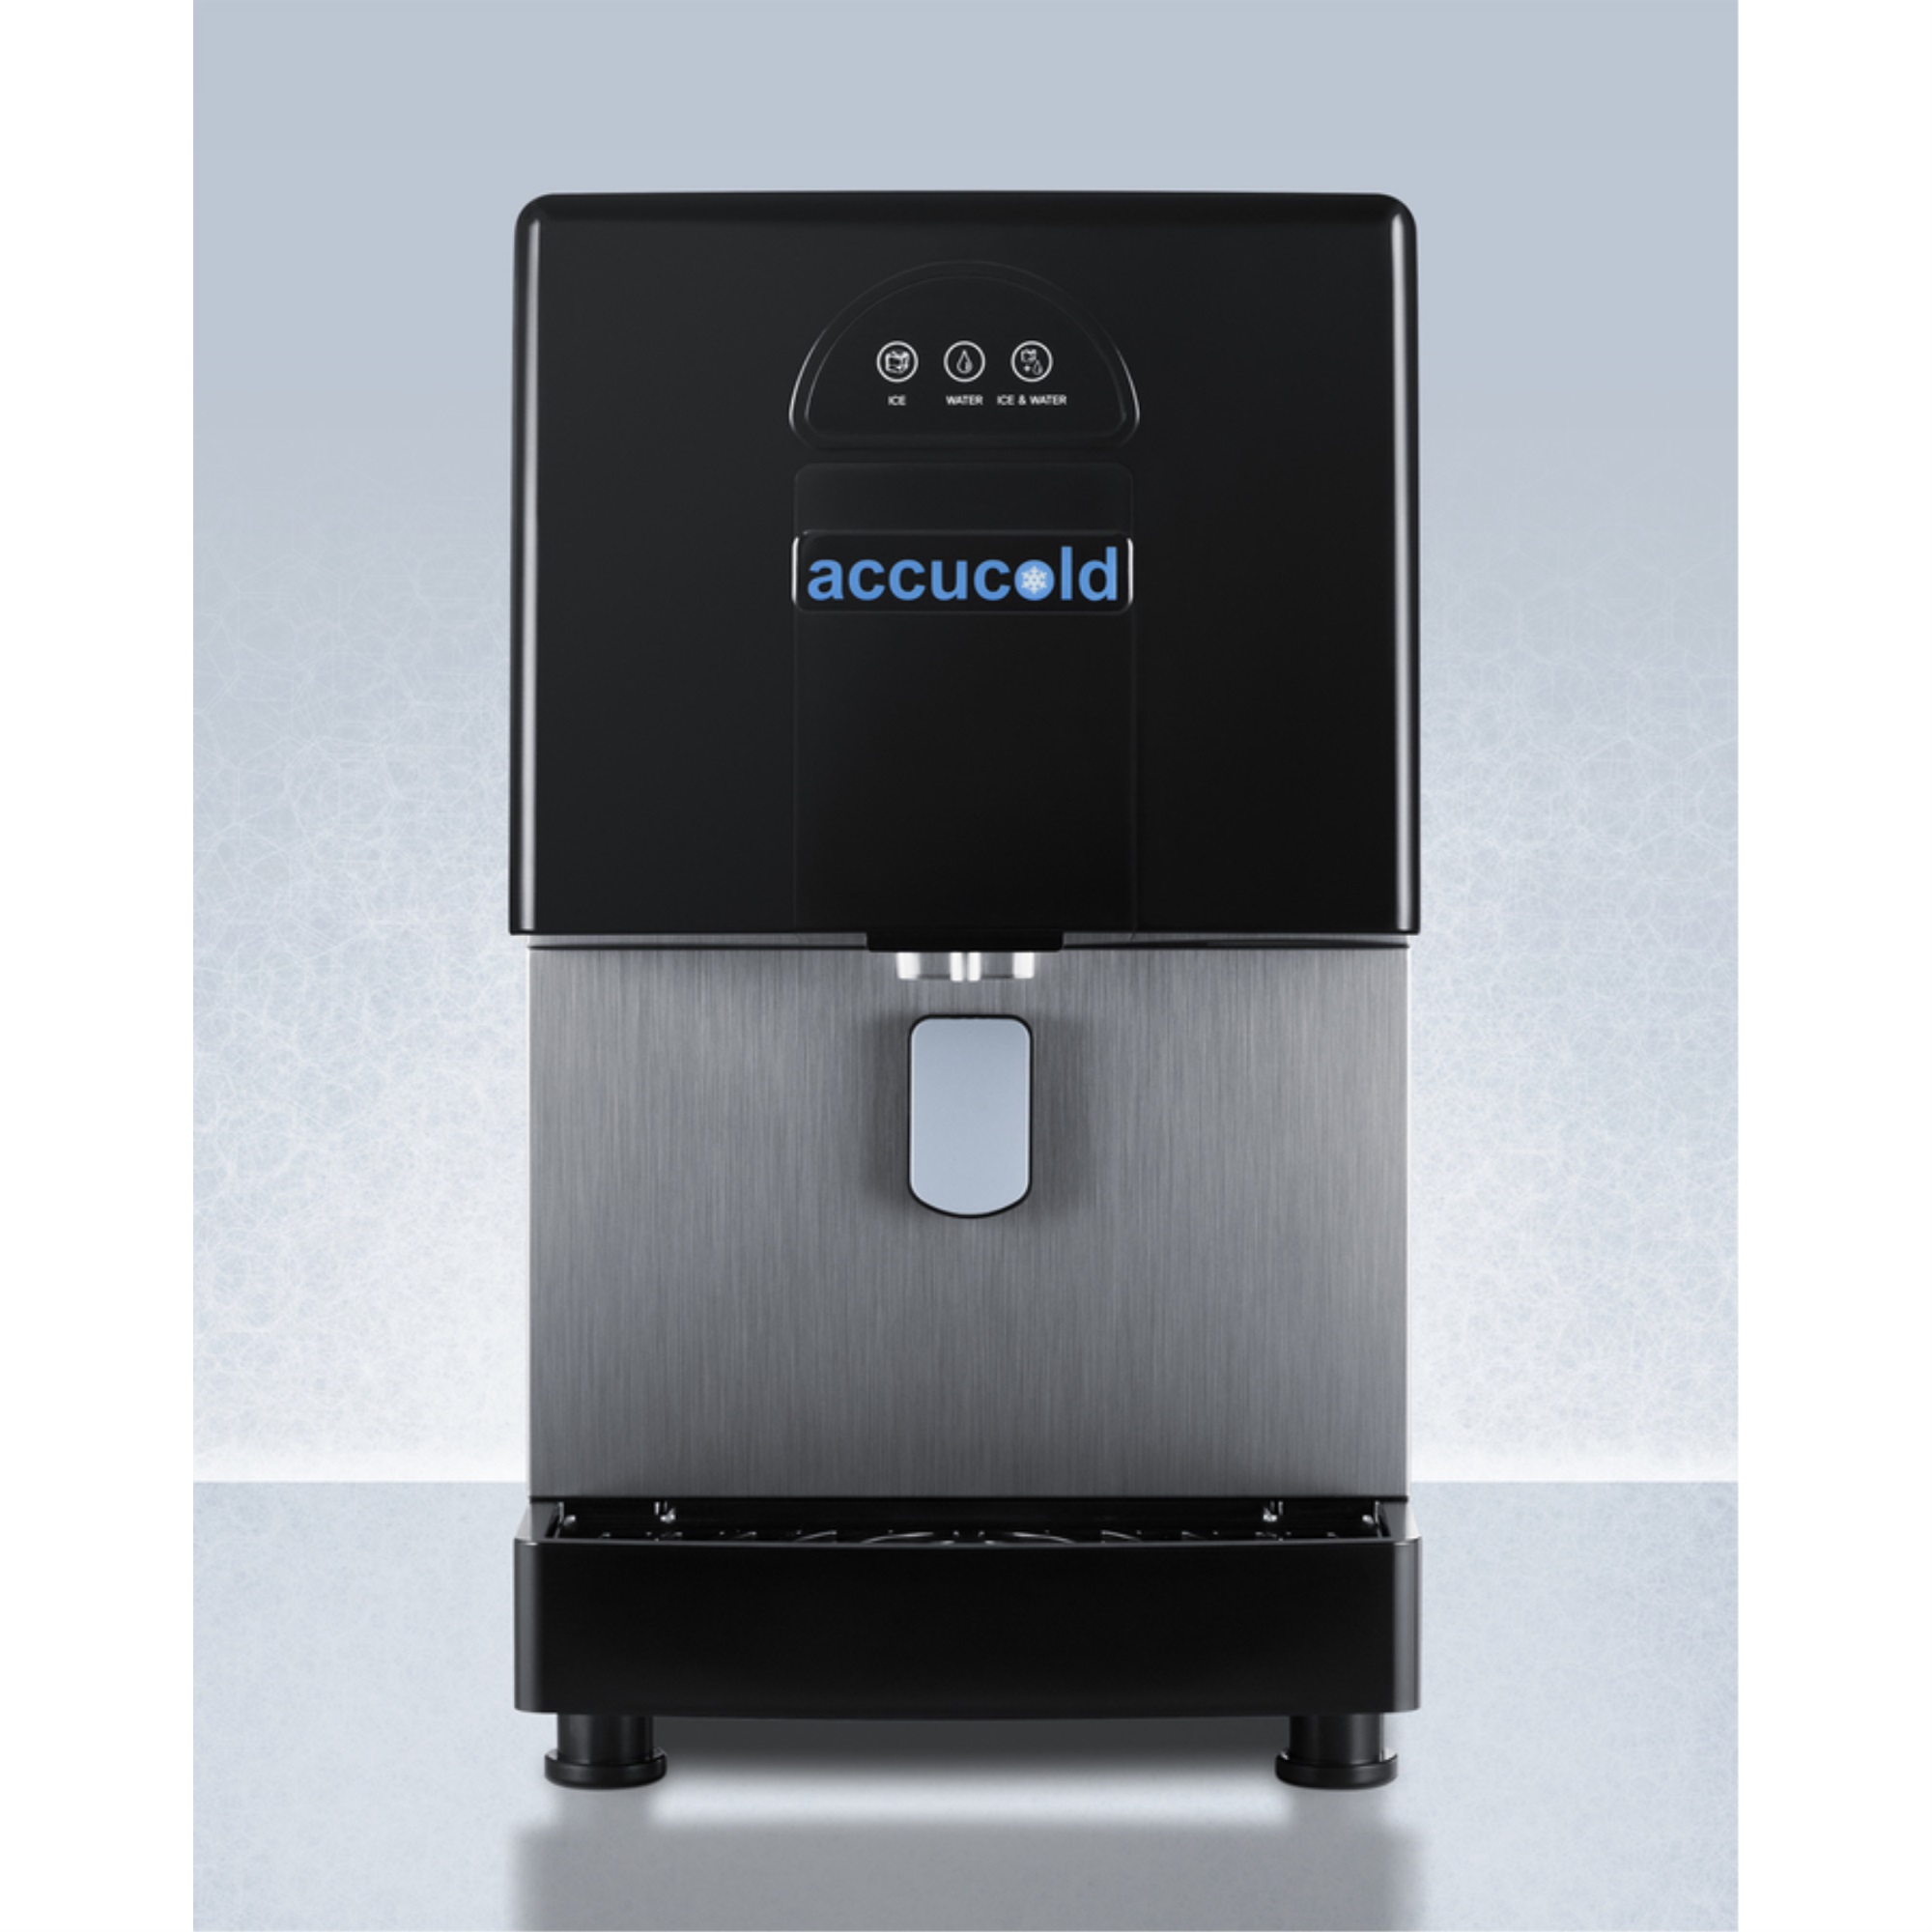 Accucold 160 lb. ice/water dispenser for countertop use